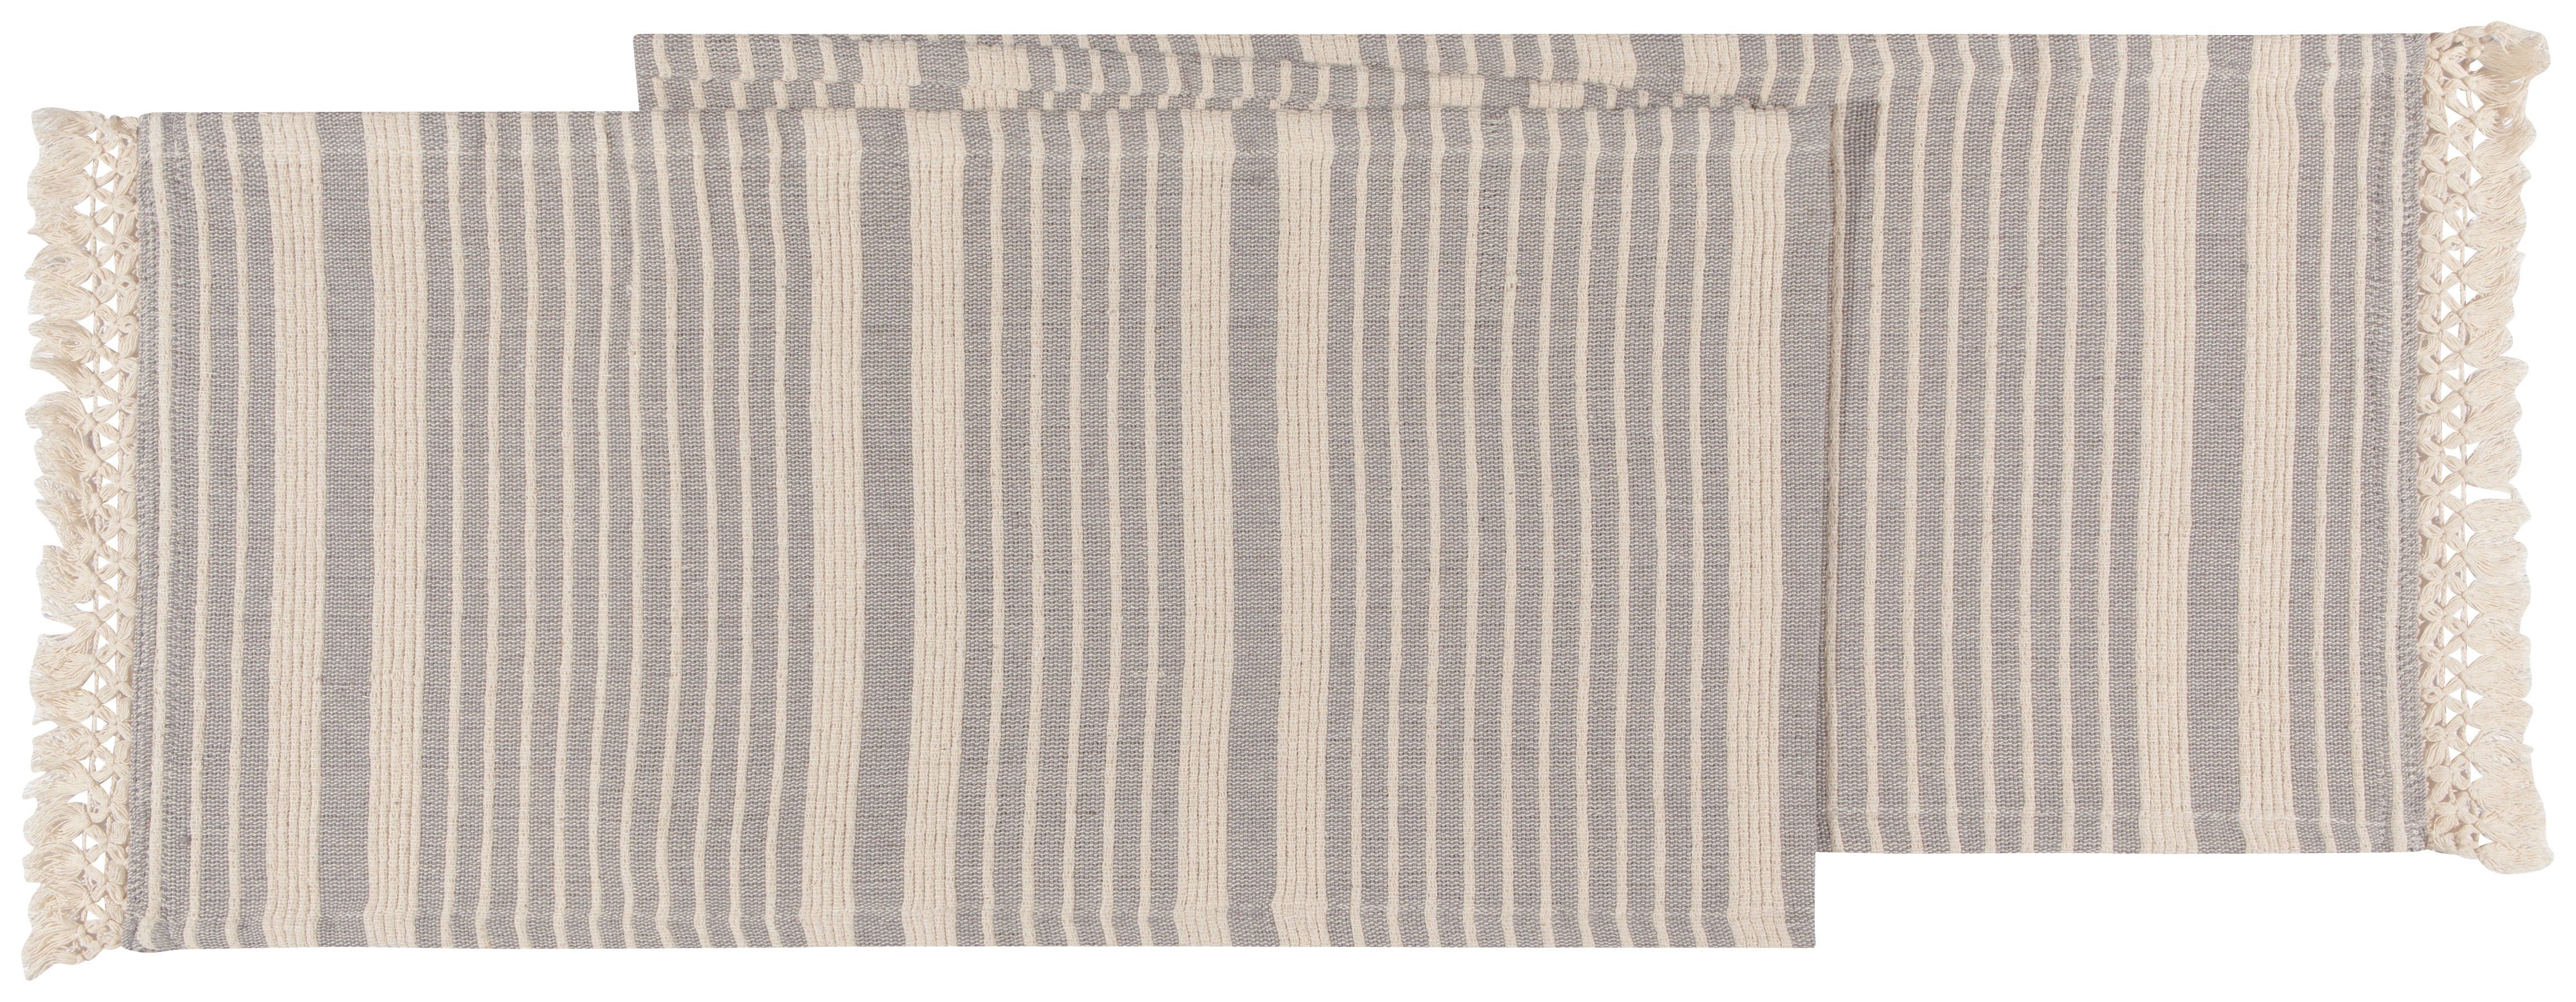 Off-white semi-folded table runner with grey stripes of different lengths